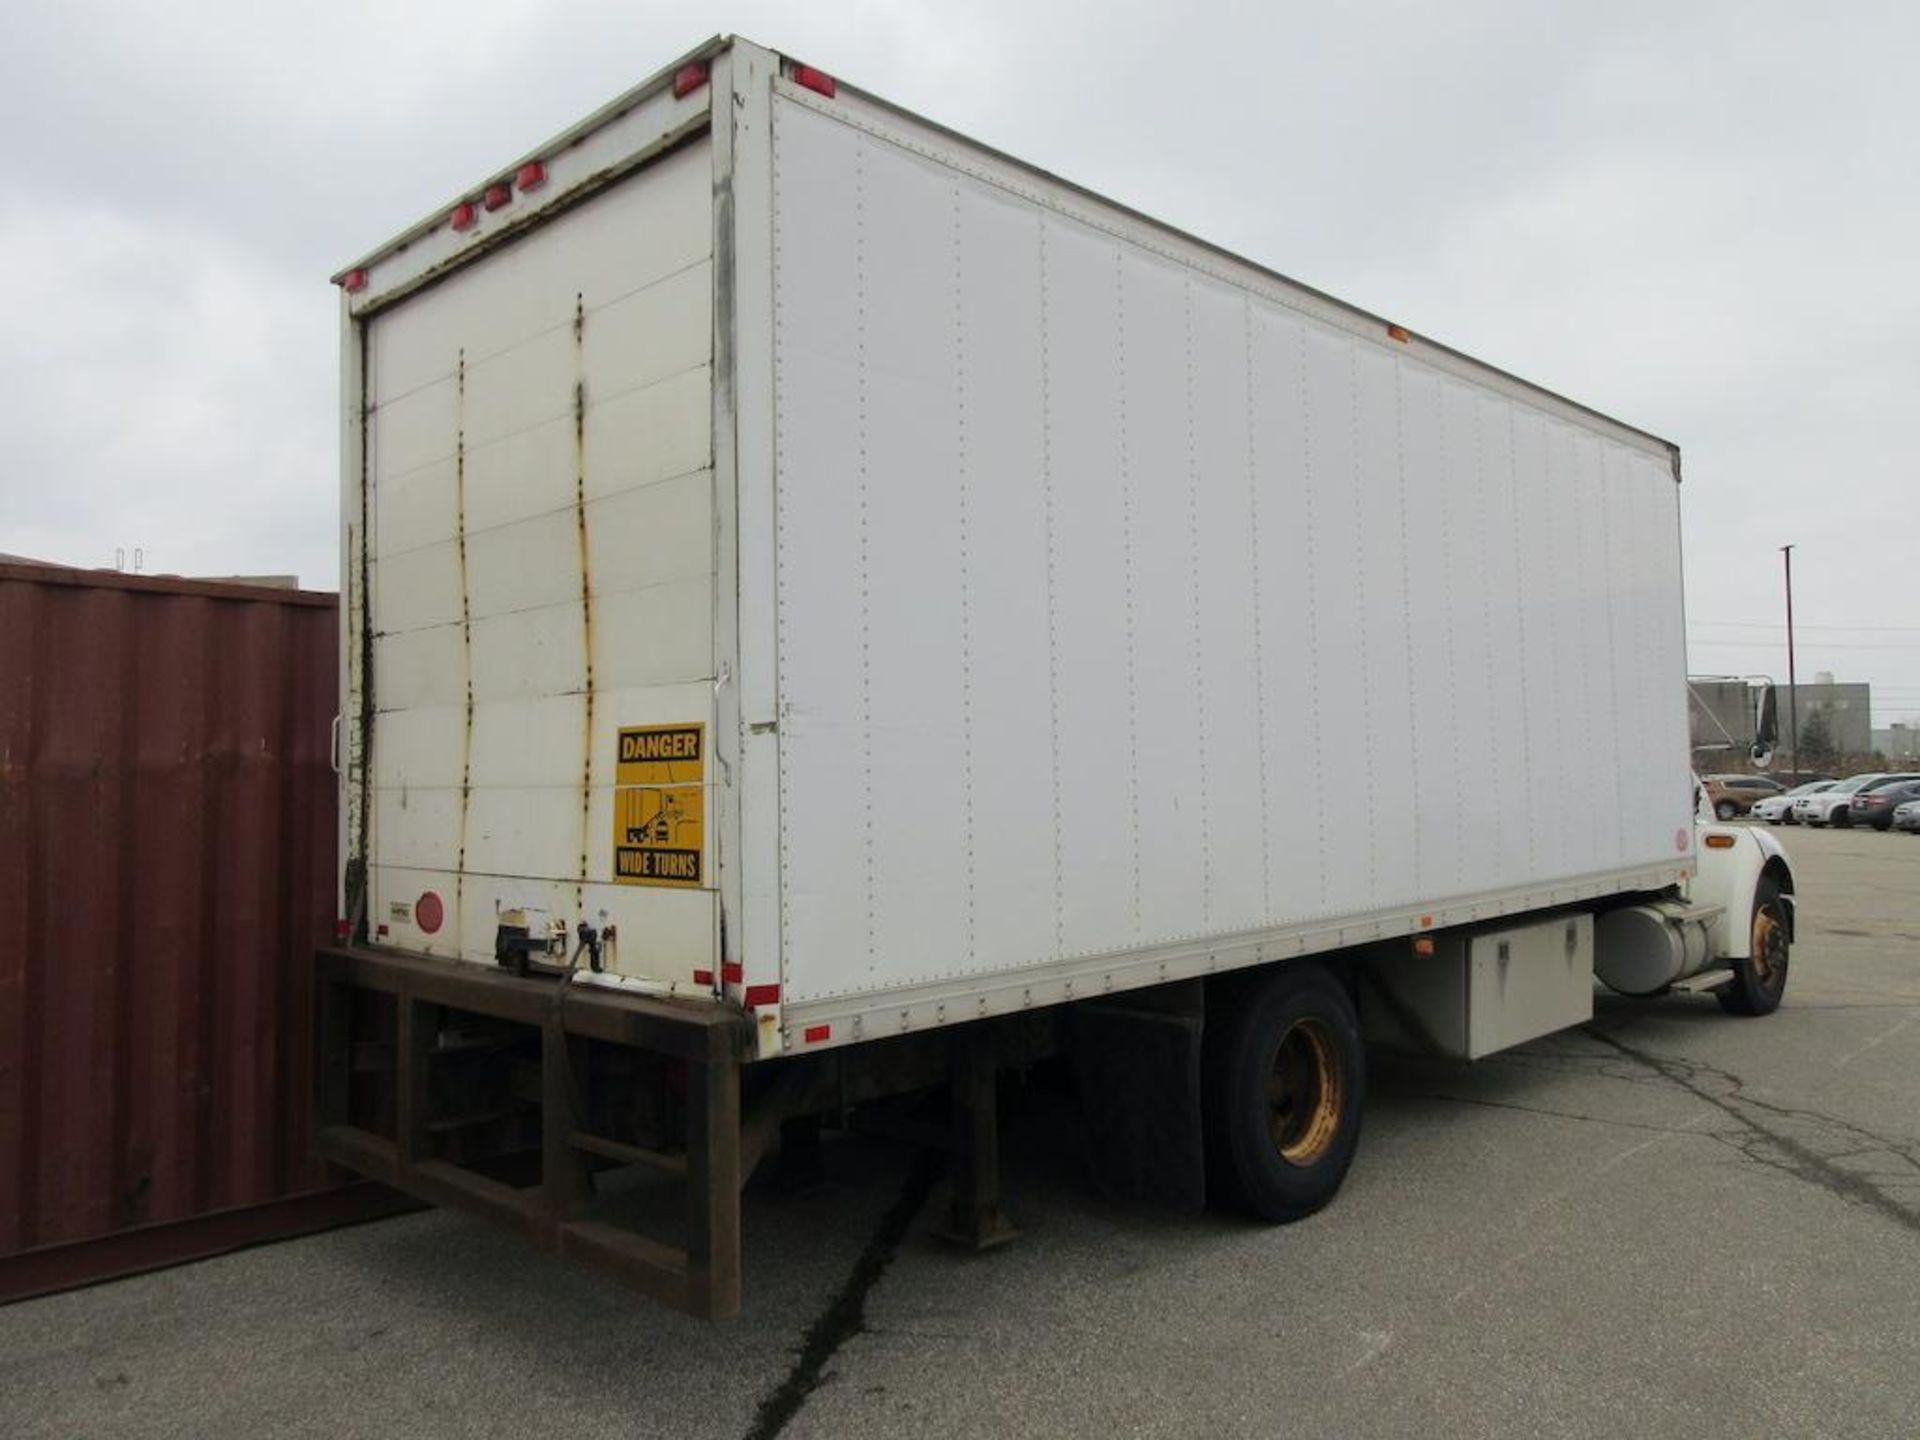 2006 Kenworth box truck model T300, 625,059 KM indicated, 10,866 hrs indicated, engine model ISB 260 - Image 15 of 15